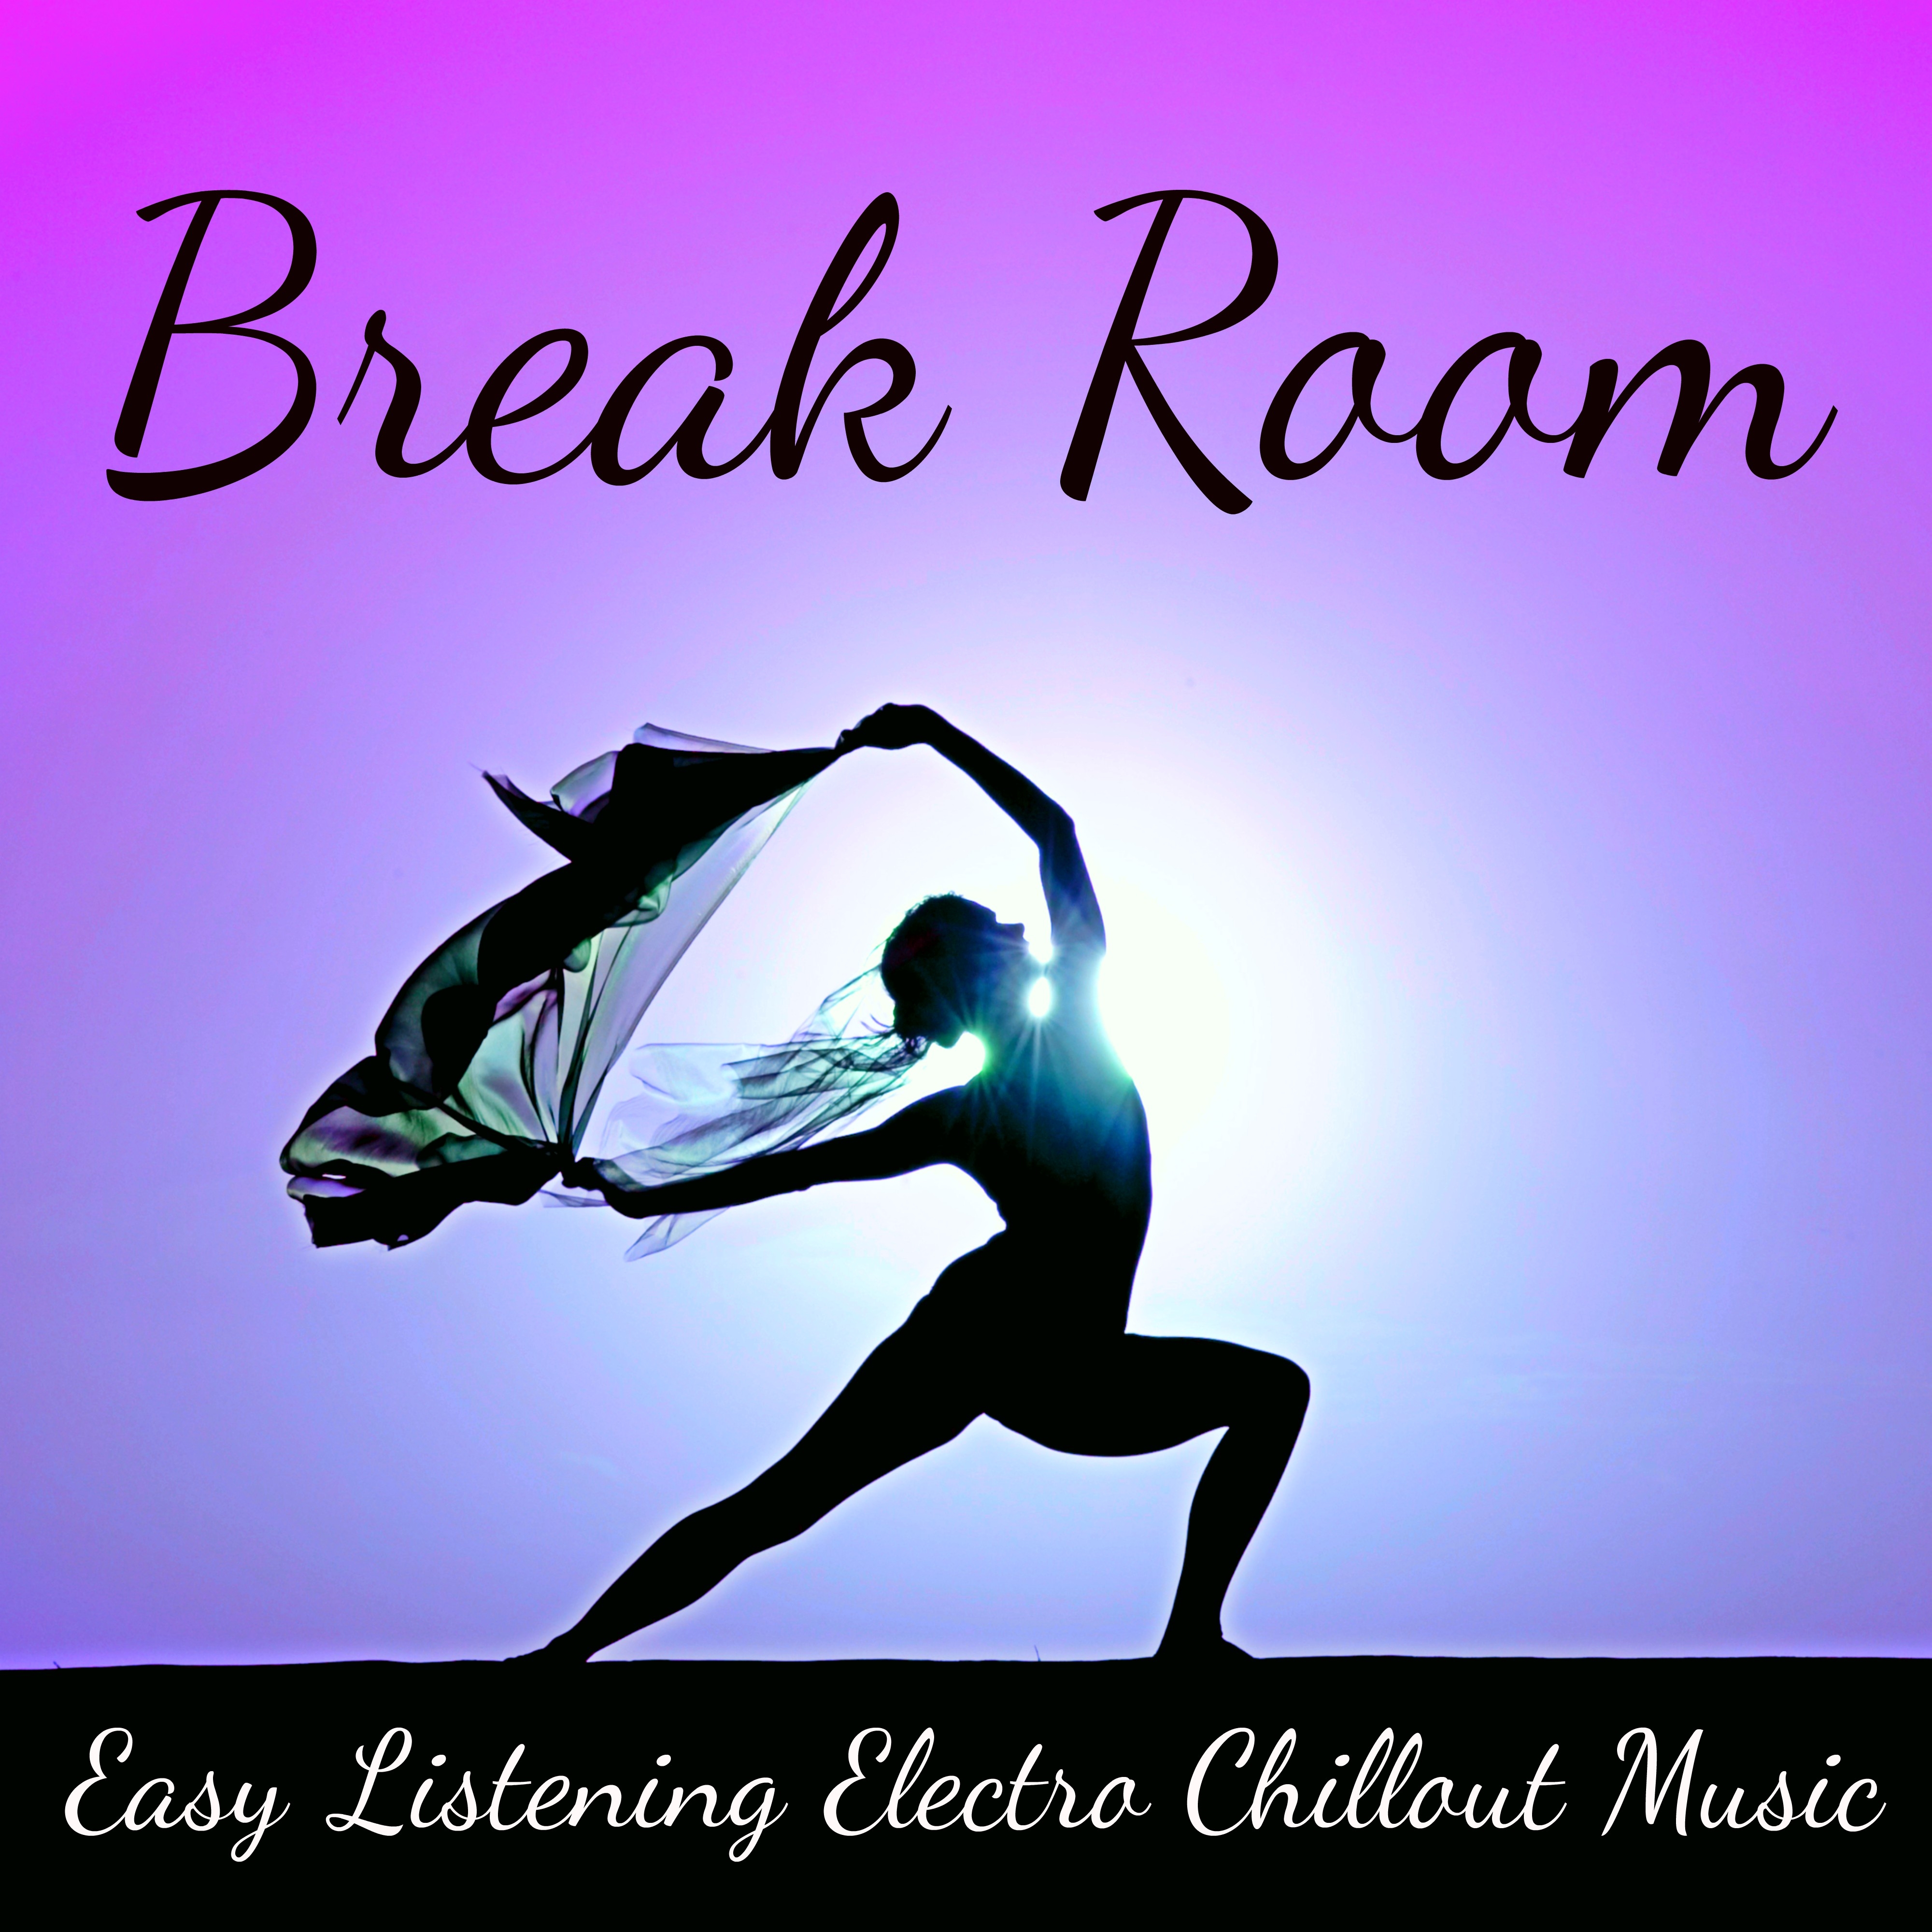 Break Room - Easy Listening Electro Chillout Music for a Pure Spirit Biofeedback Training and Body Exercises